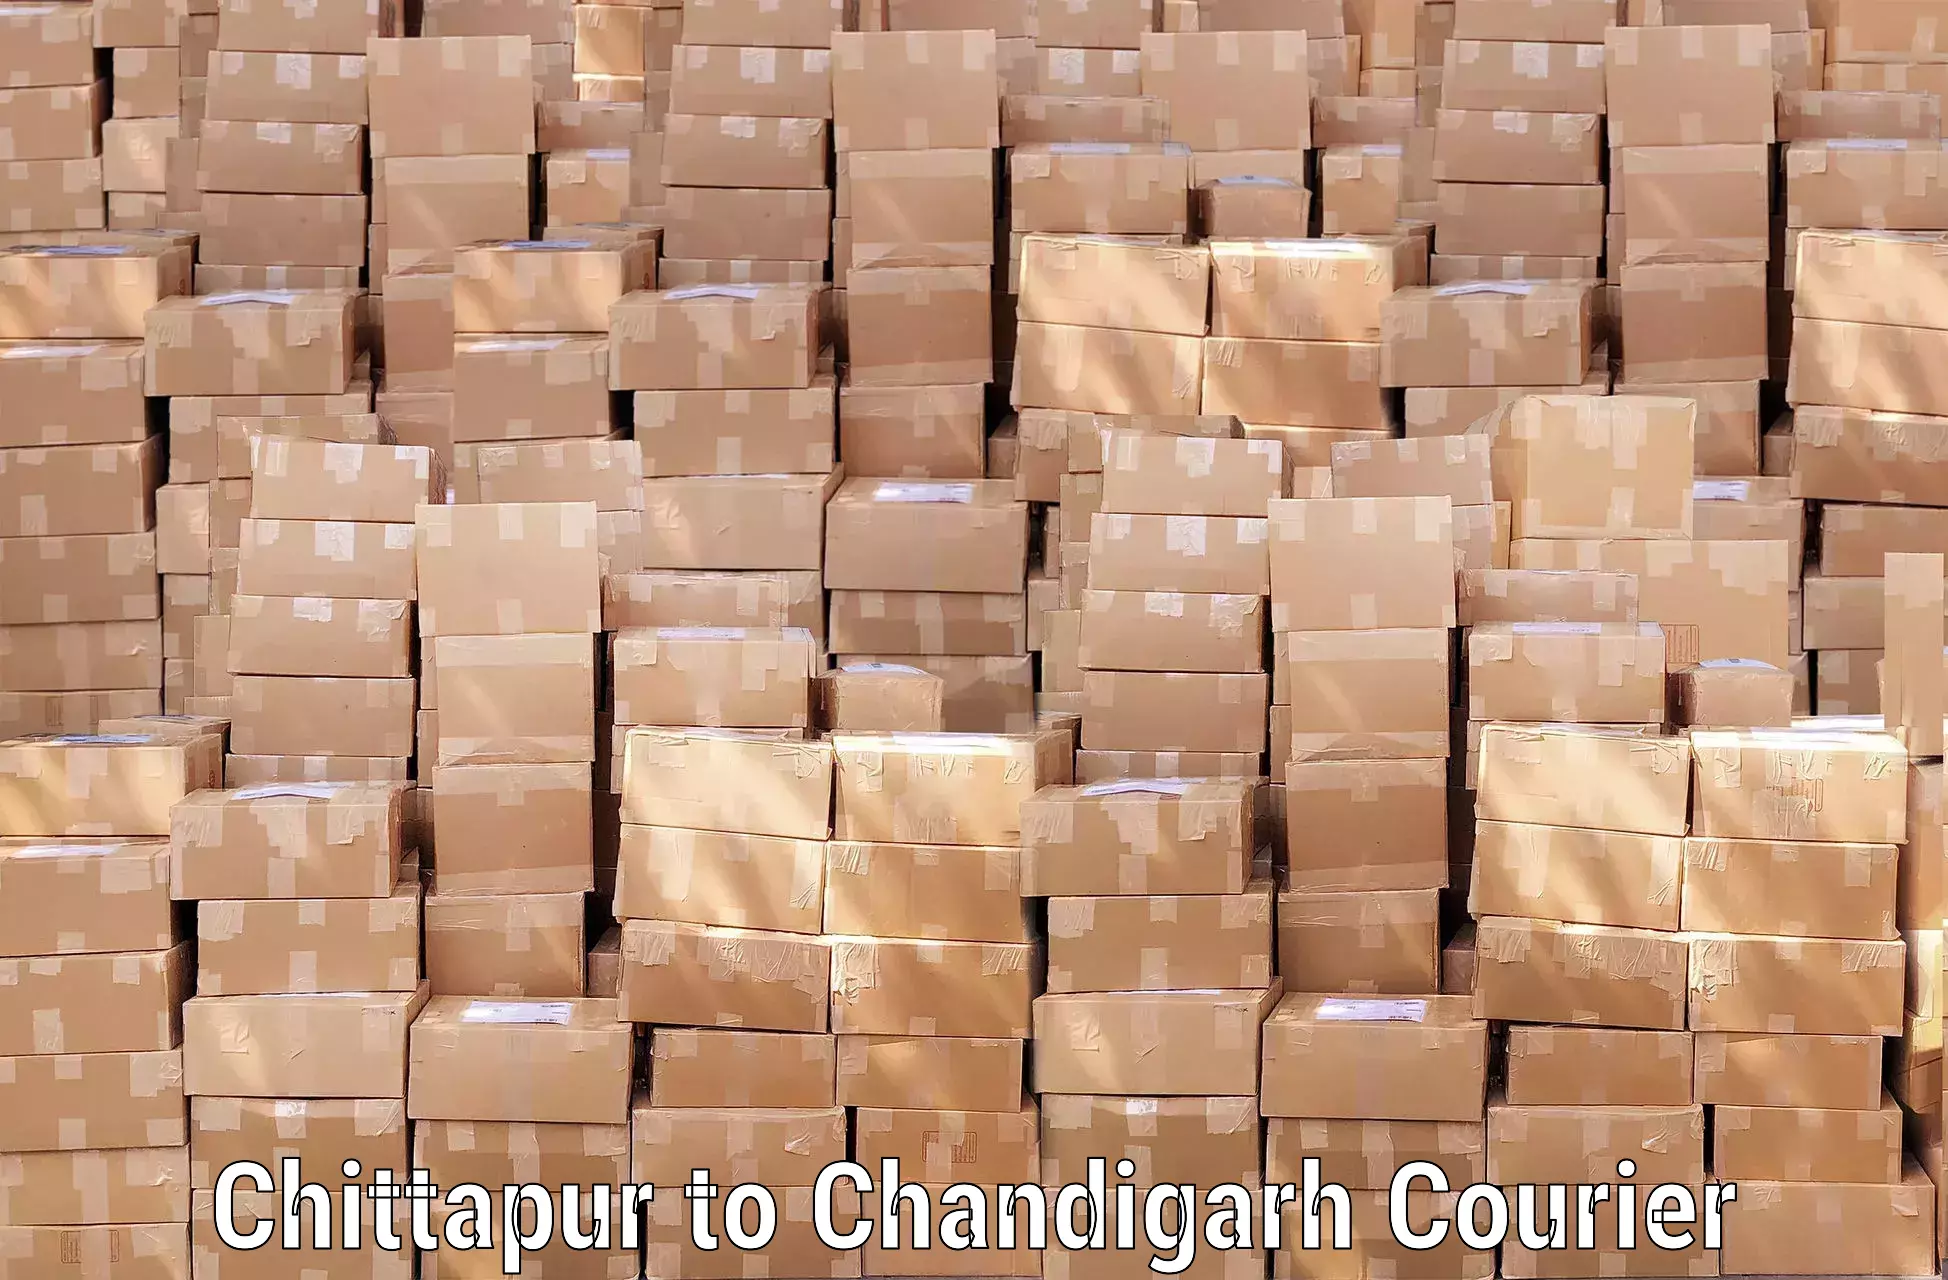 Luggage shipment specialists Chittapur to Chandigarh